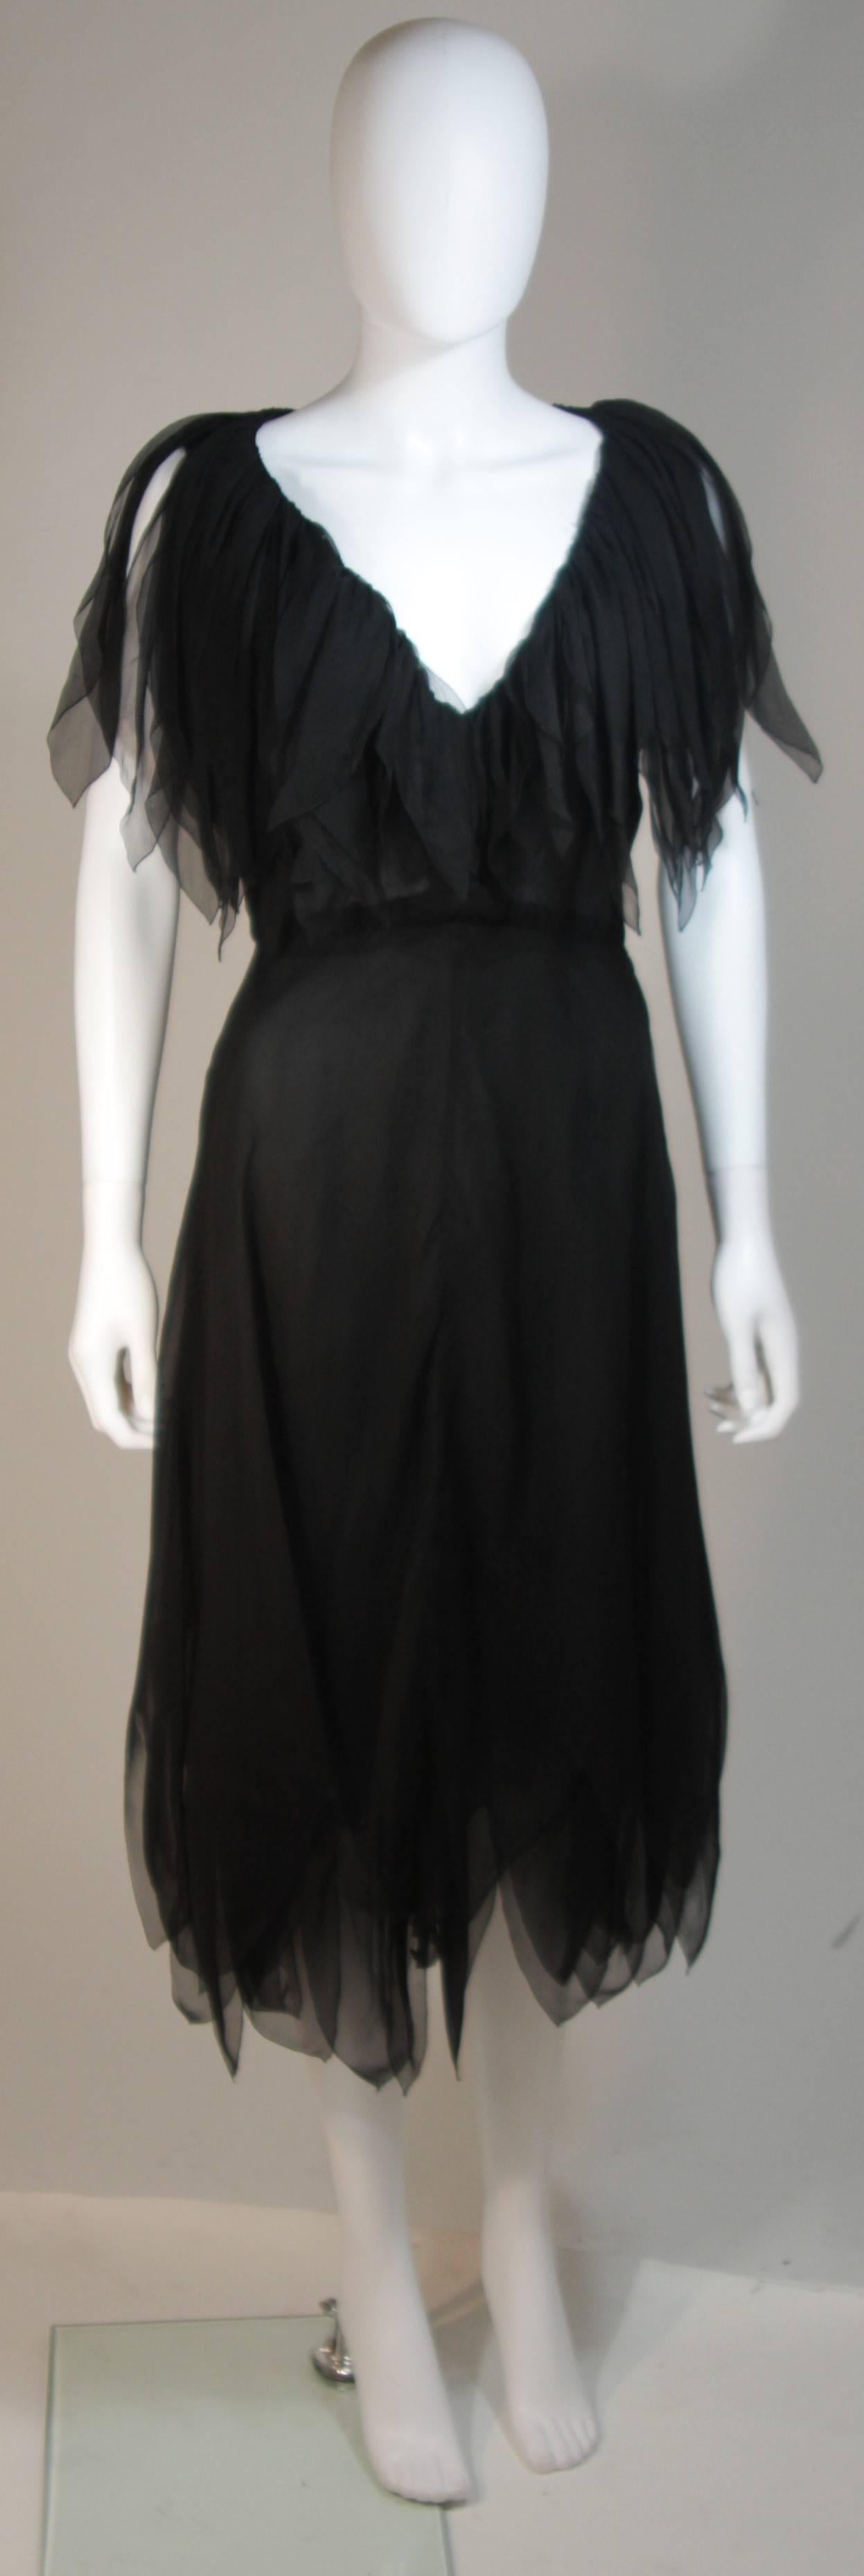 This Christian Dior design is available for viewing at our Beverly Hills Boutique. We offer a large selection of evening gowns and luxury garments. 

 This cocktail dress is composed of a layered black silk chiffon with fluttery strips at the